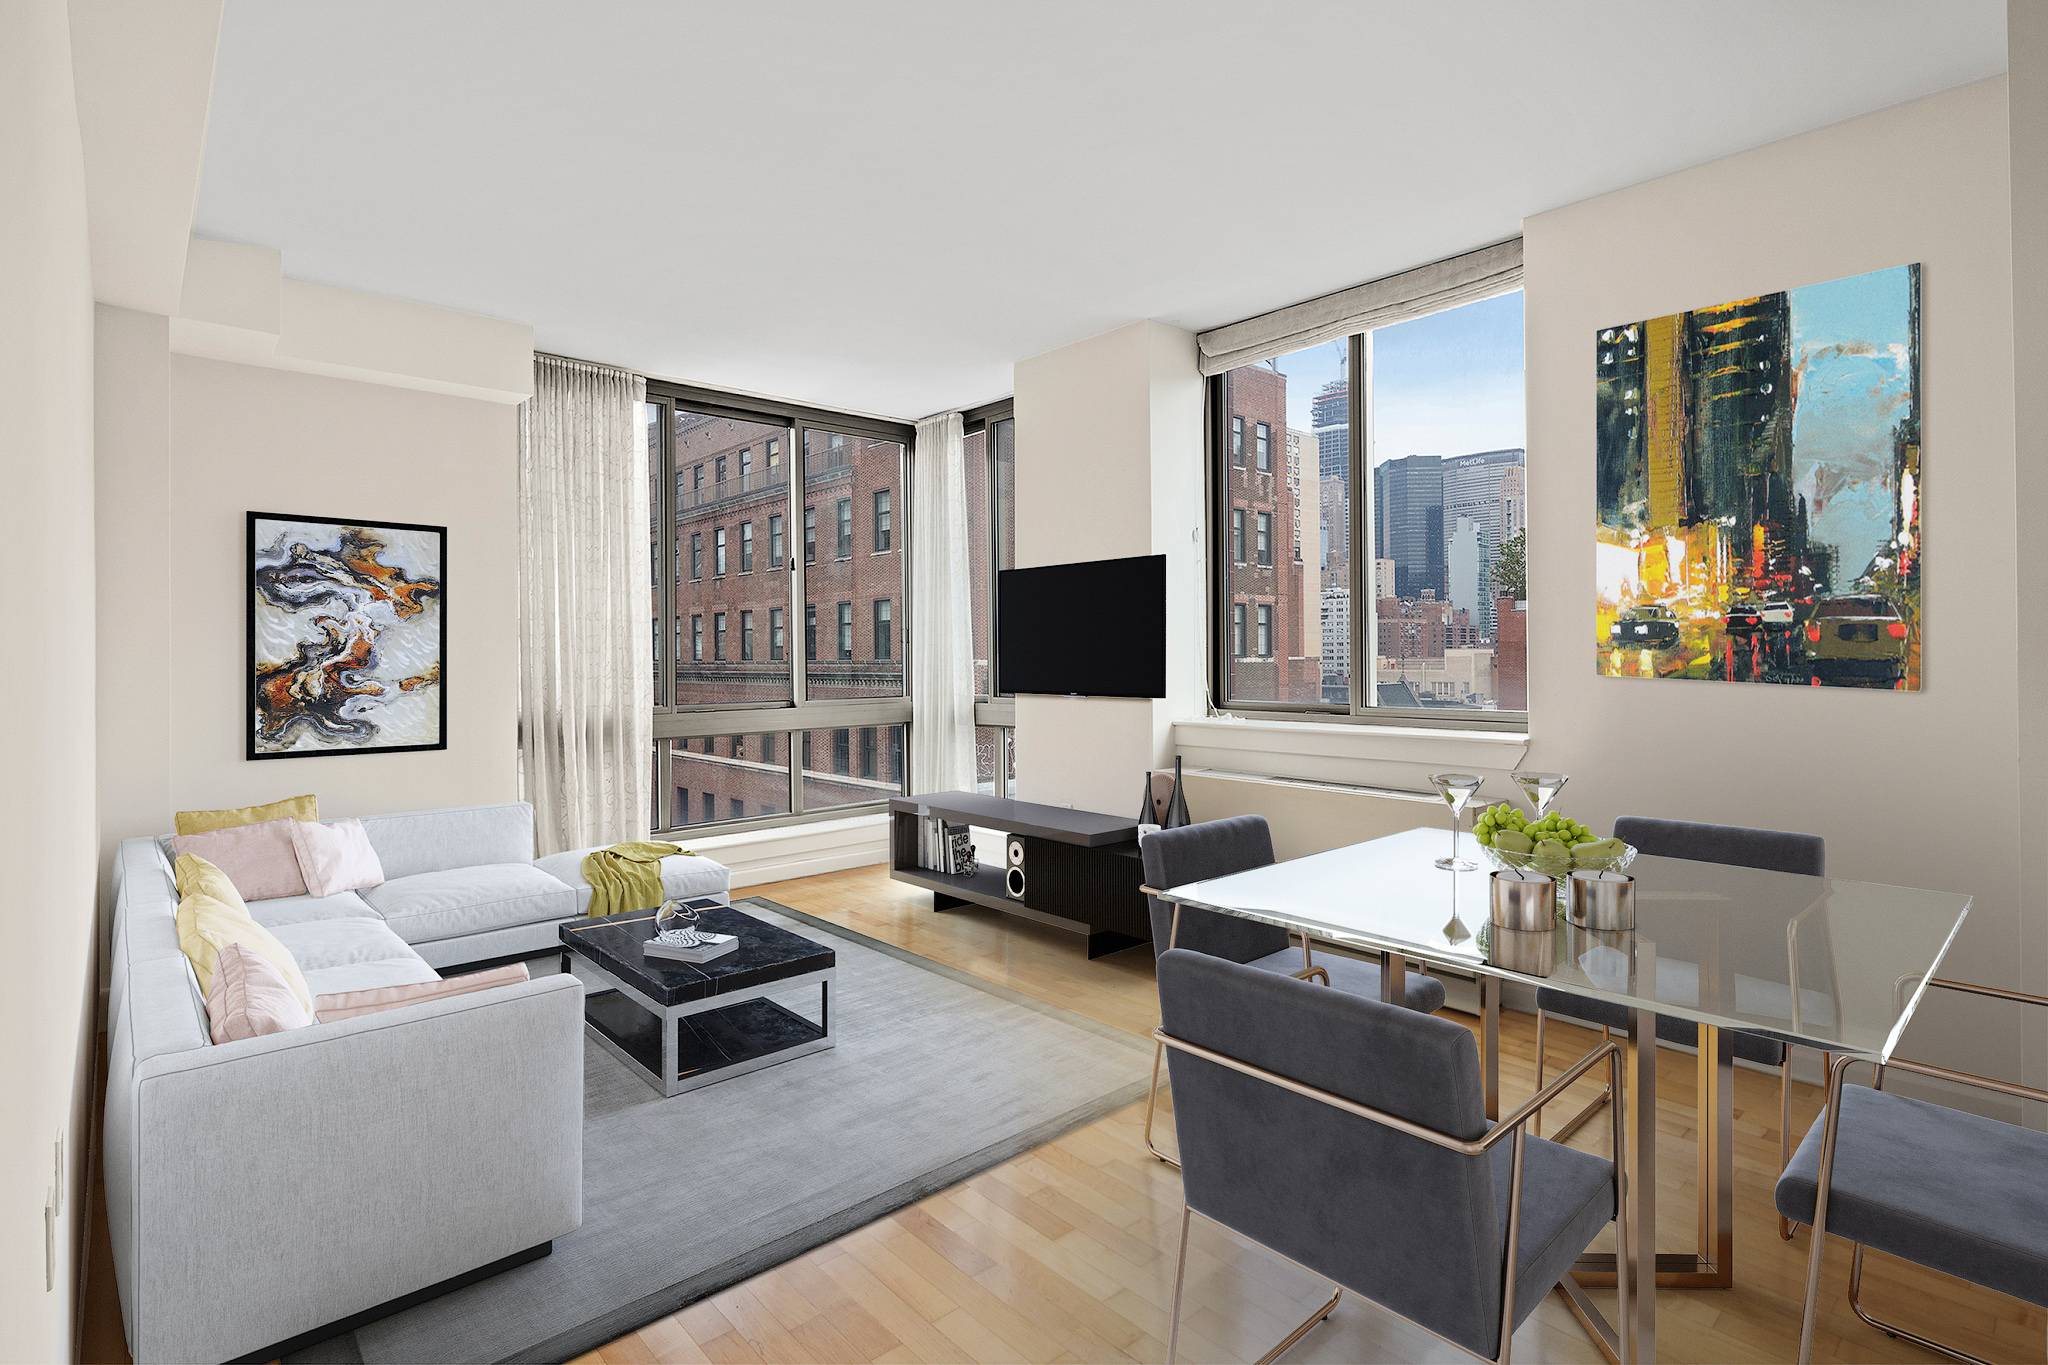 Apt. 9A at The Sycamore is an exceptional split two bedroom condominium rental with North, East, and West exposures, plus Empire State, Chrysler, and MetLife Building views !